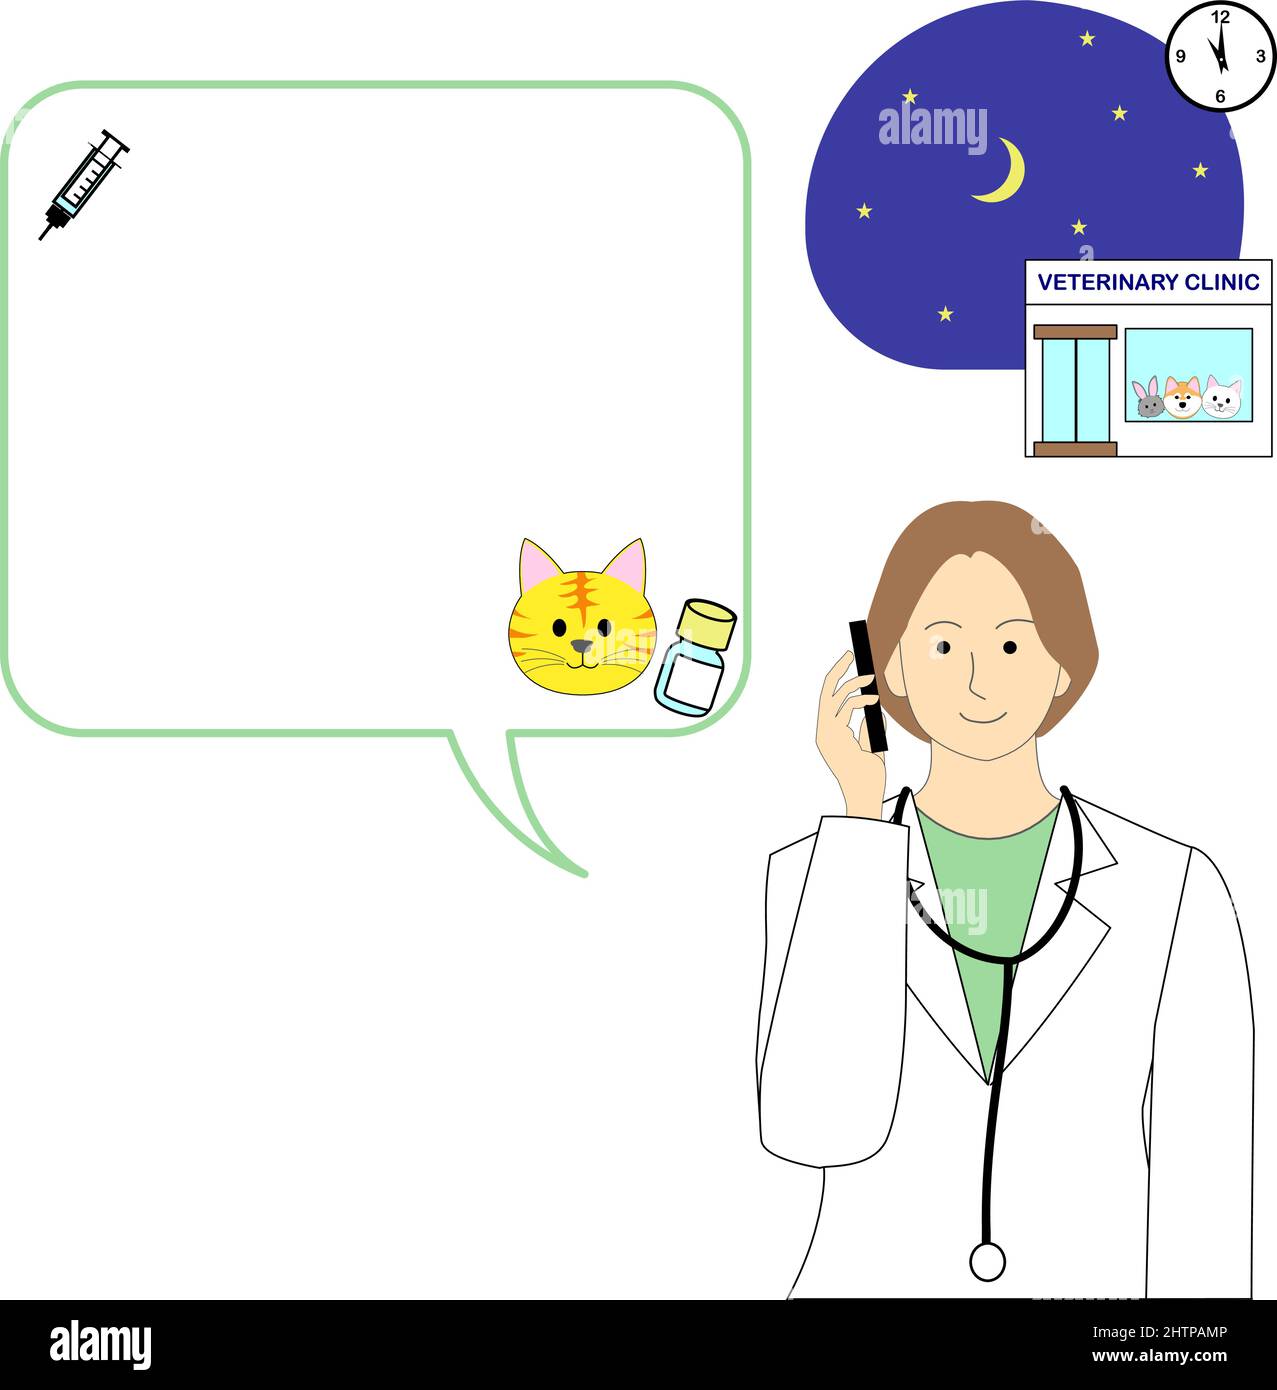 Night scene of the veterinary clinic with a speech balloon and veterinarian woman on a cellphone Stock Vector